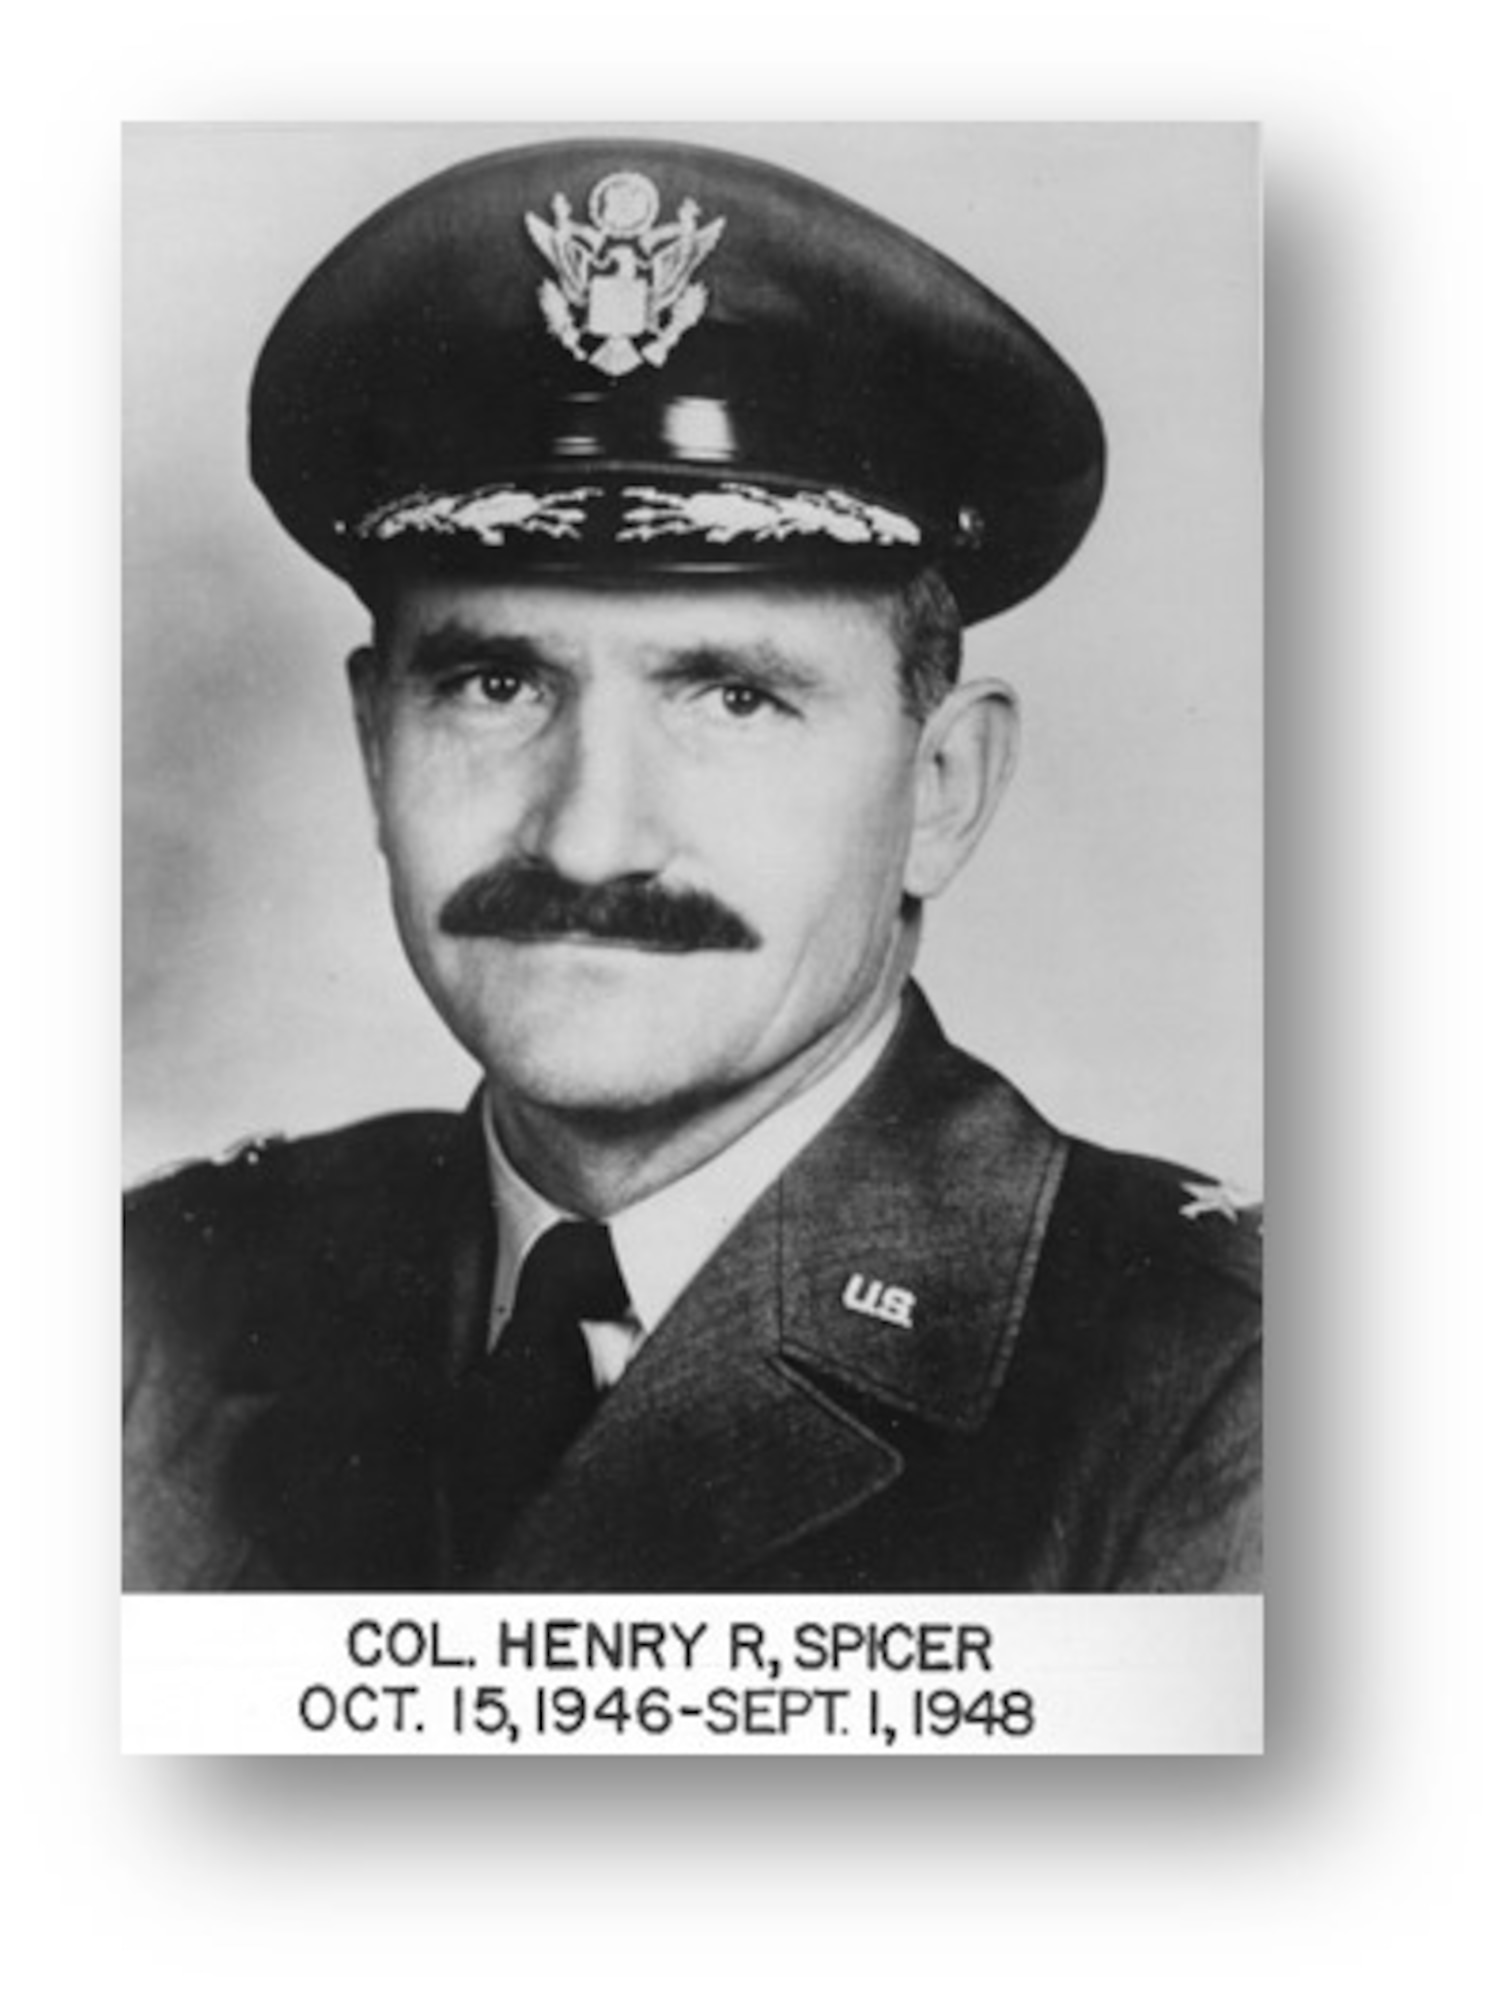 U.S. Air Force Col. Henry R. Spicer, retired Major General, informational graphic. (Courtesy Photo)